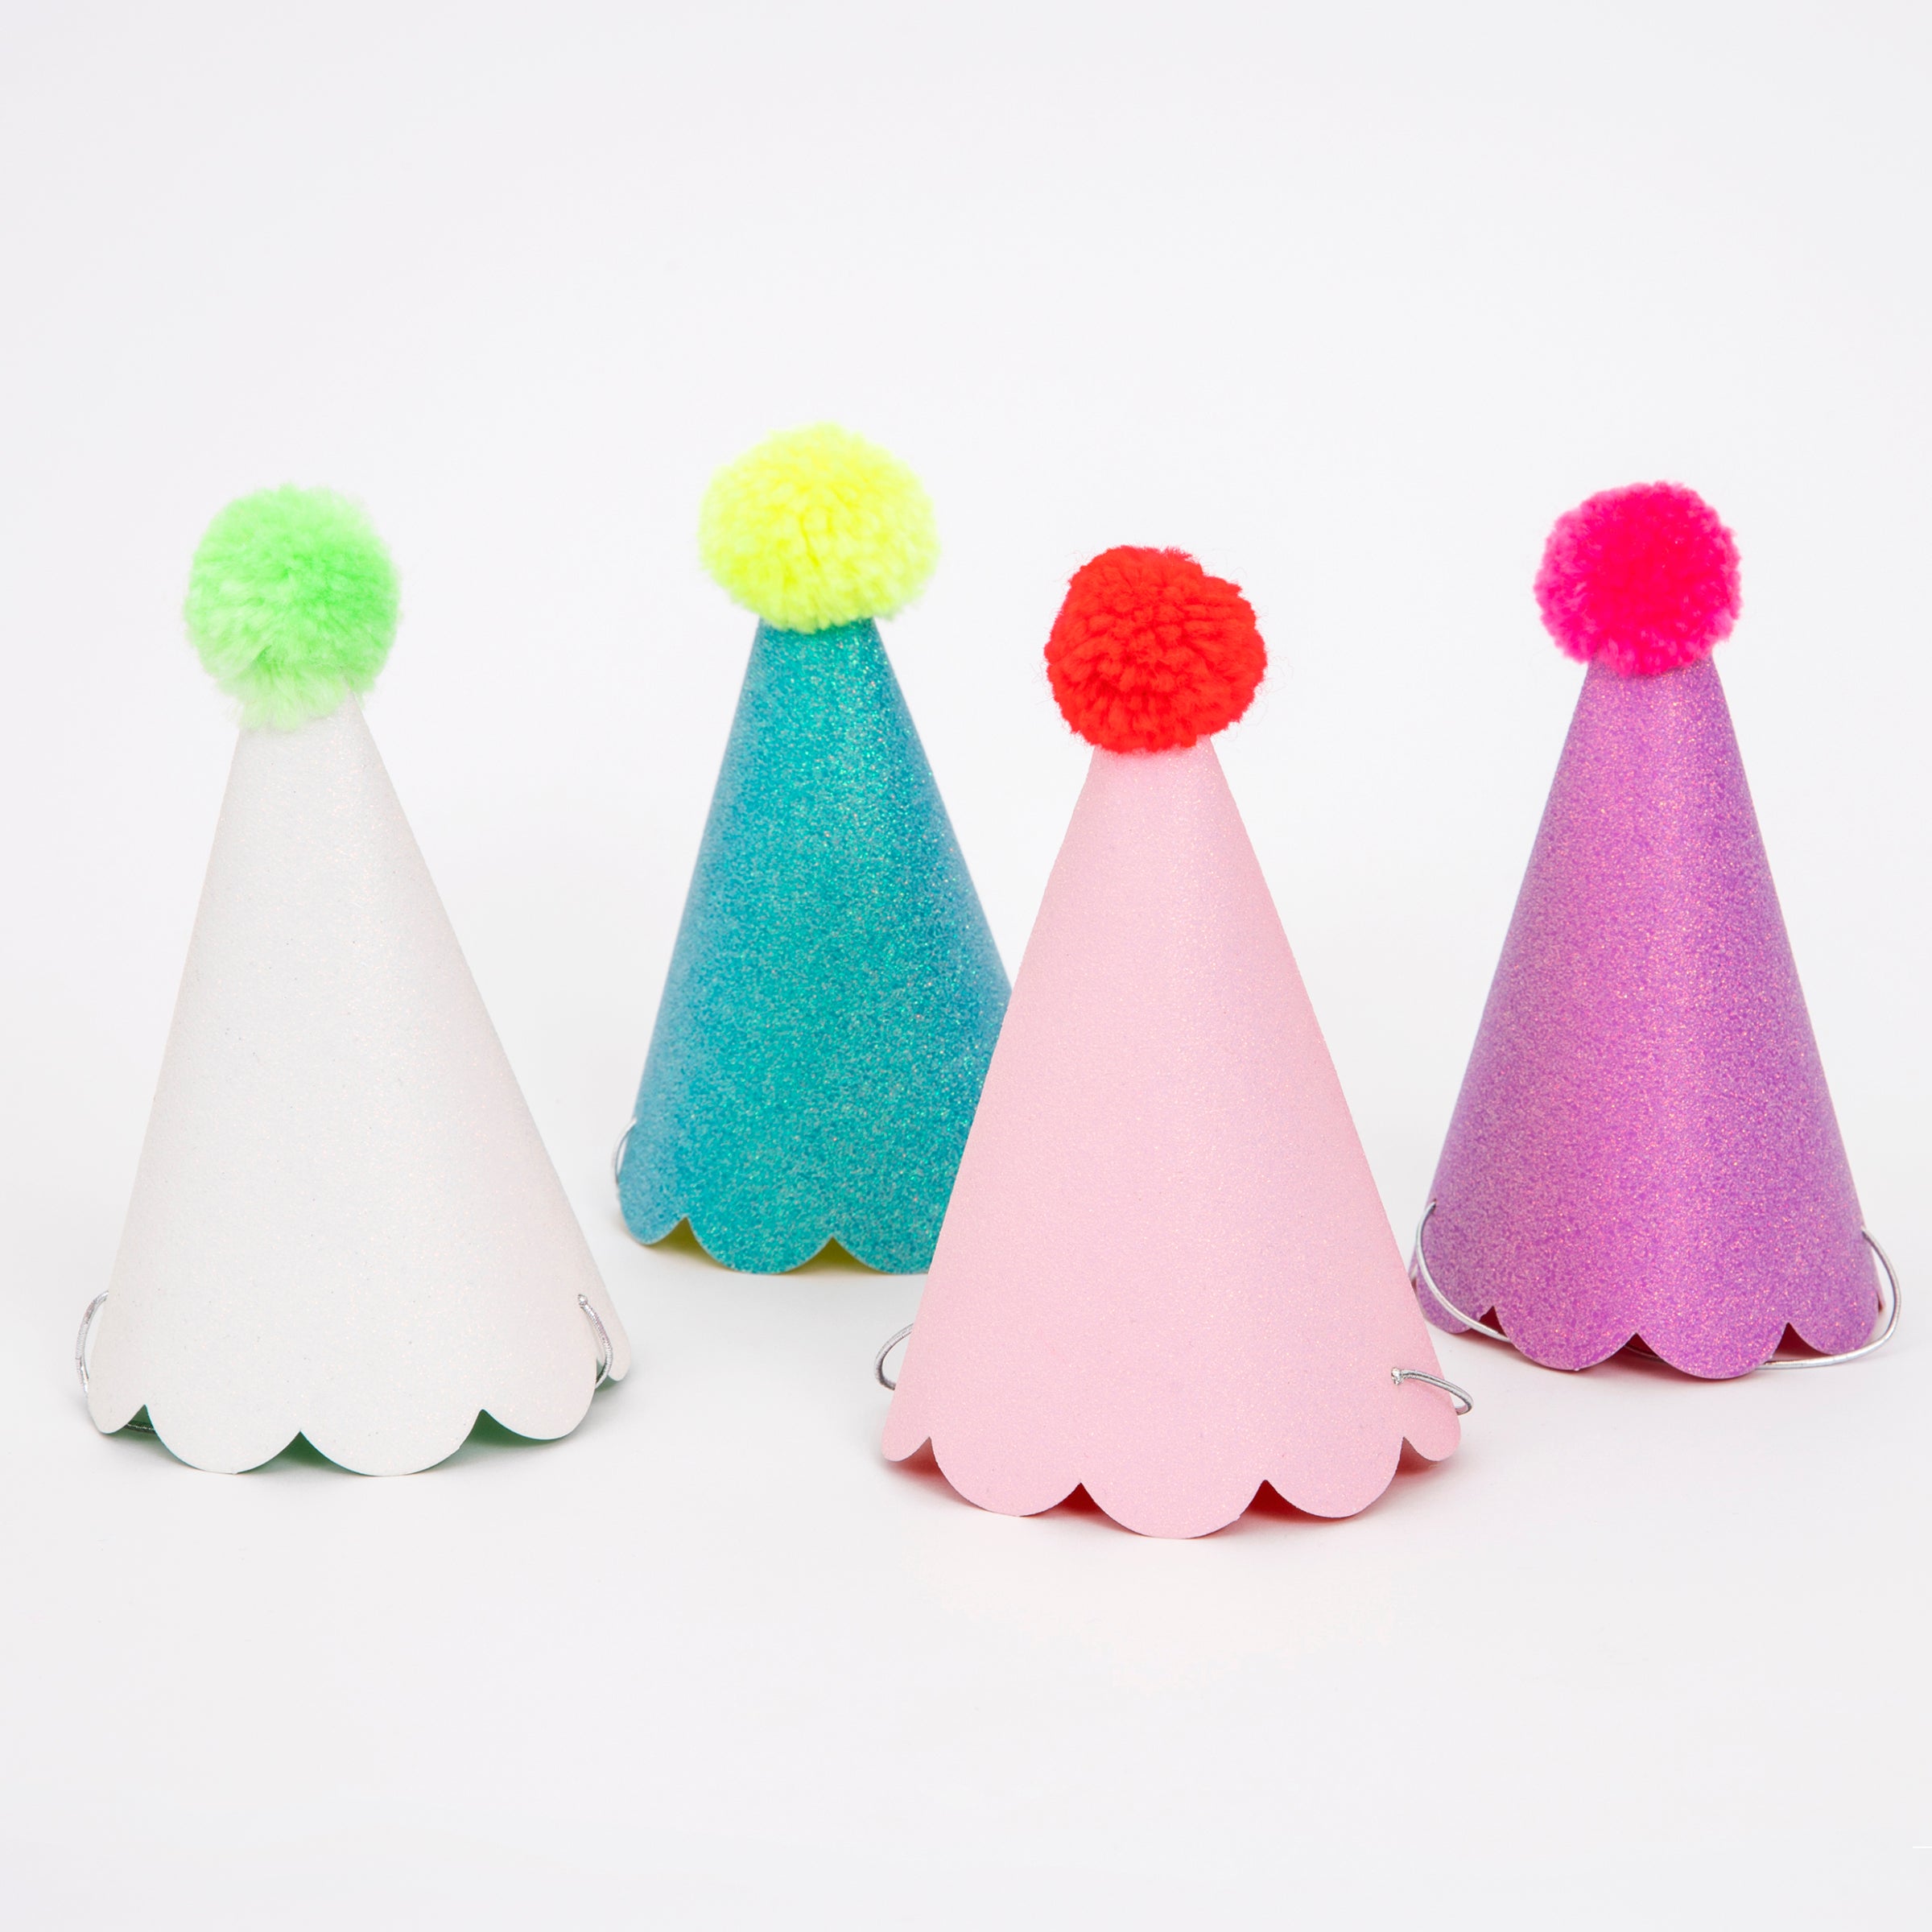 These fun hats are topped with colourful pompoms and covered with crystal glitter.